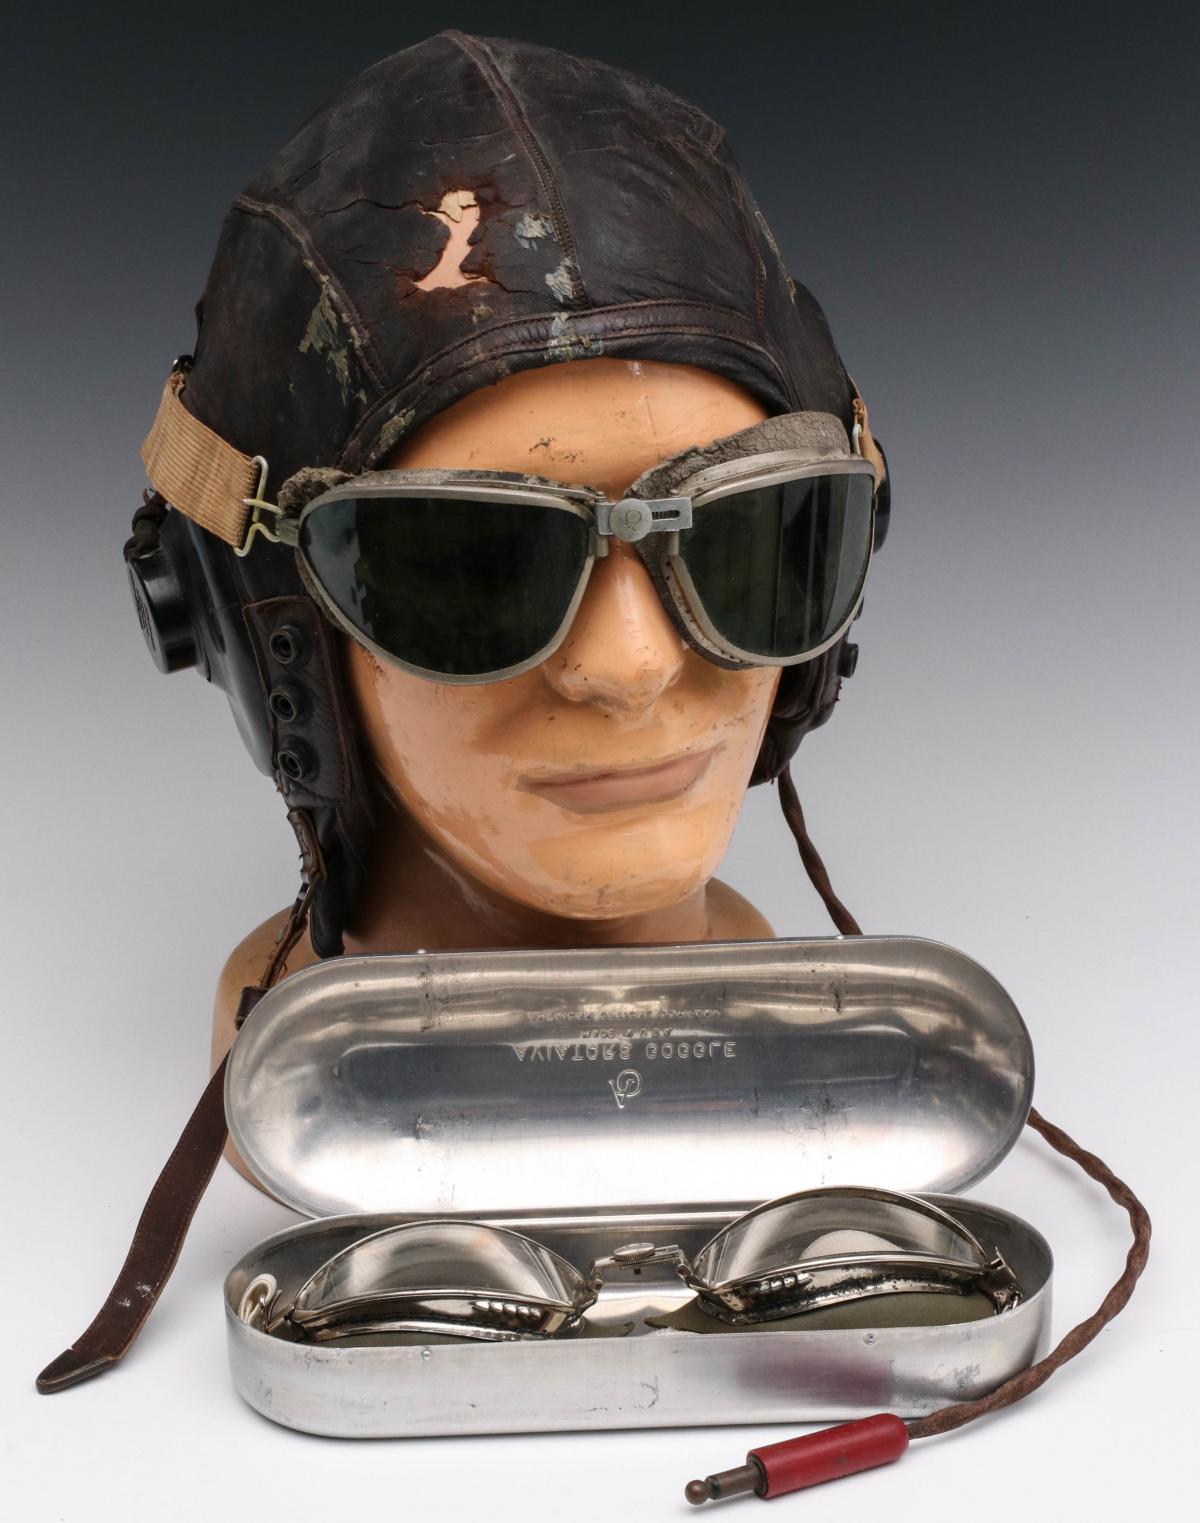 WWII ERA AVIATOR'S HELMET AND GOGGLES, PLUS ANOTHER